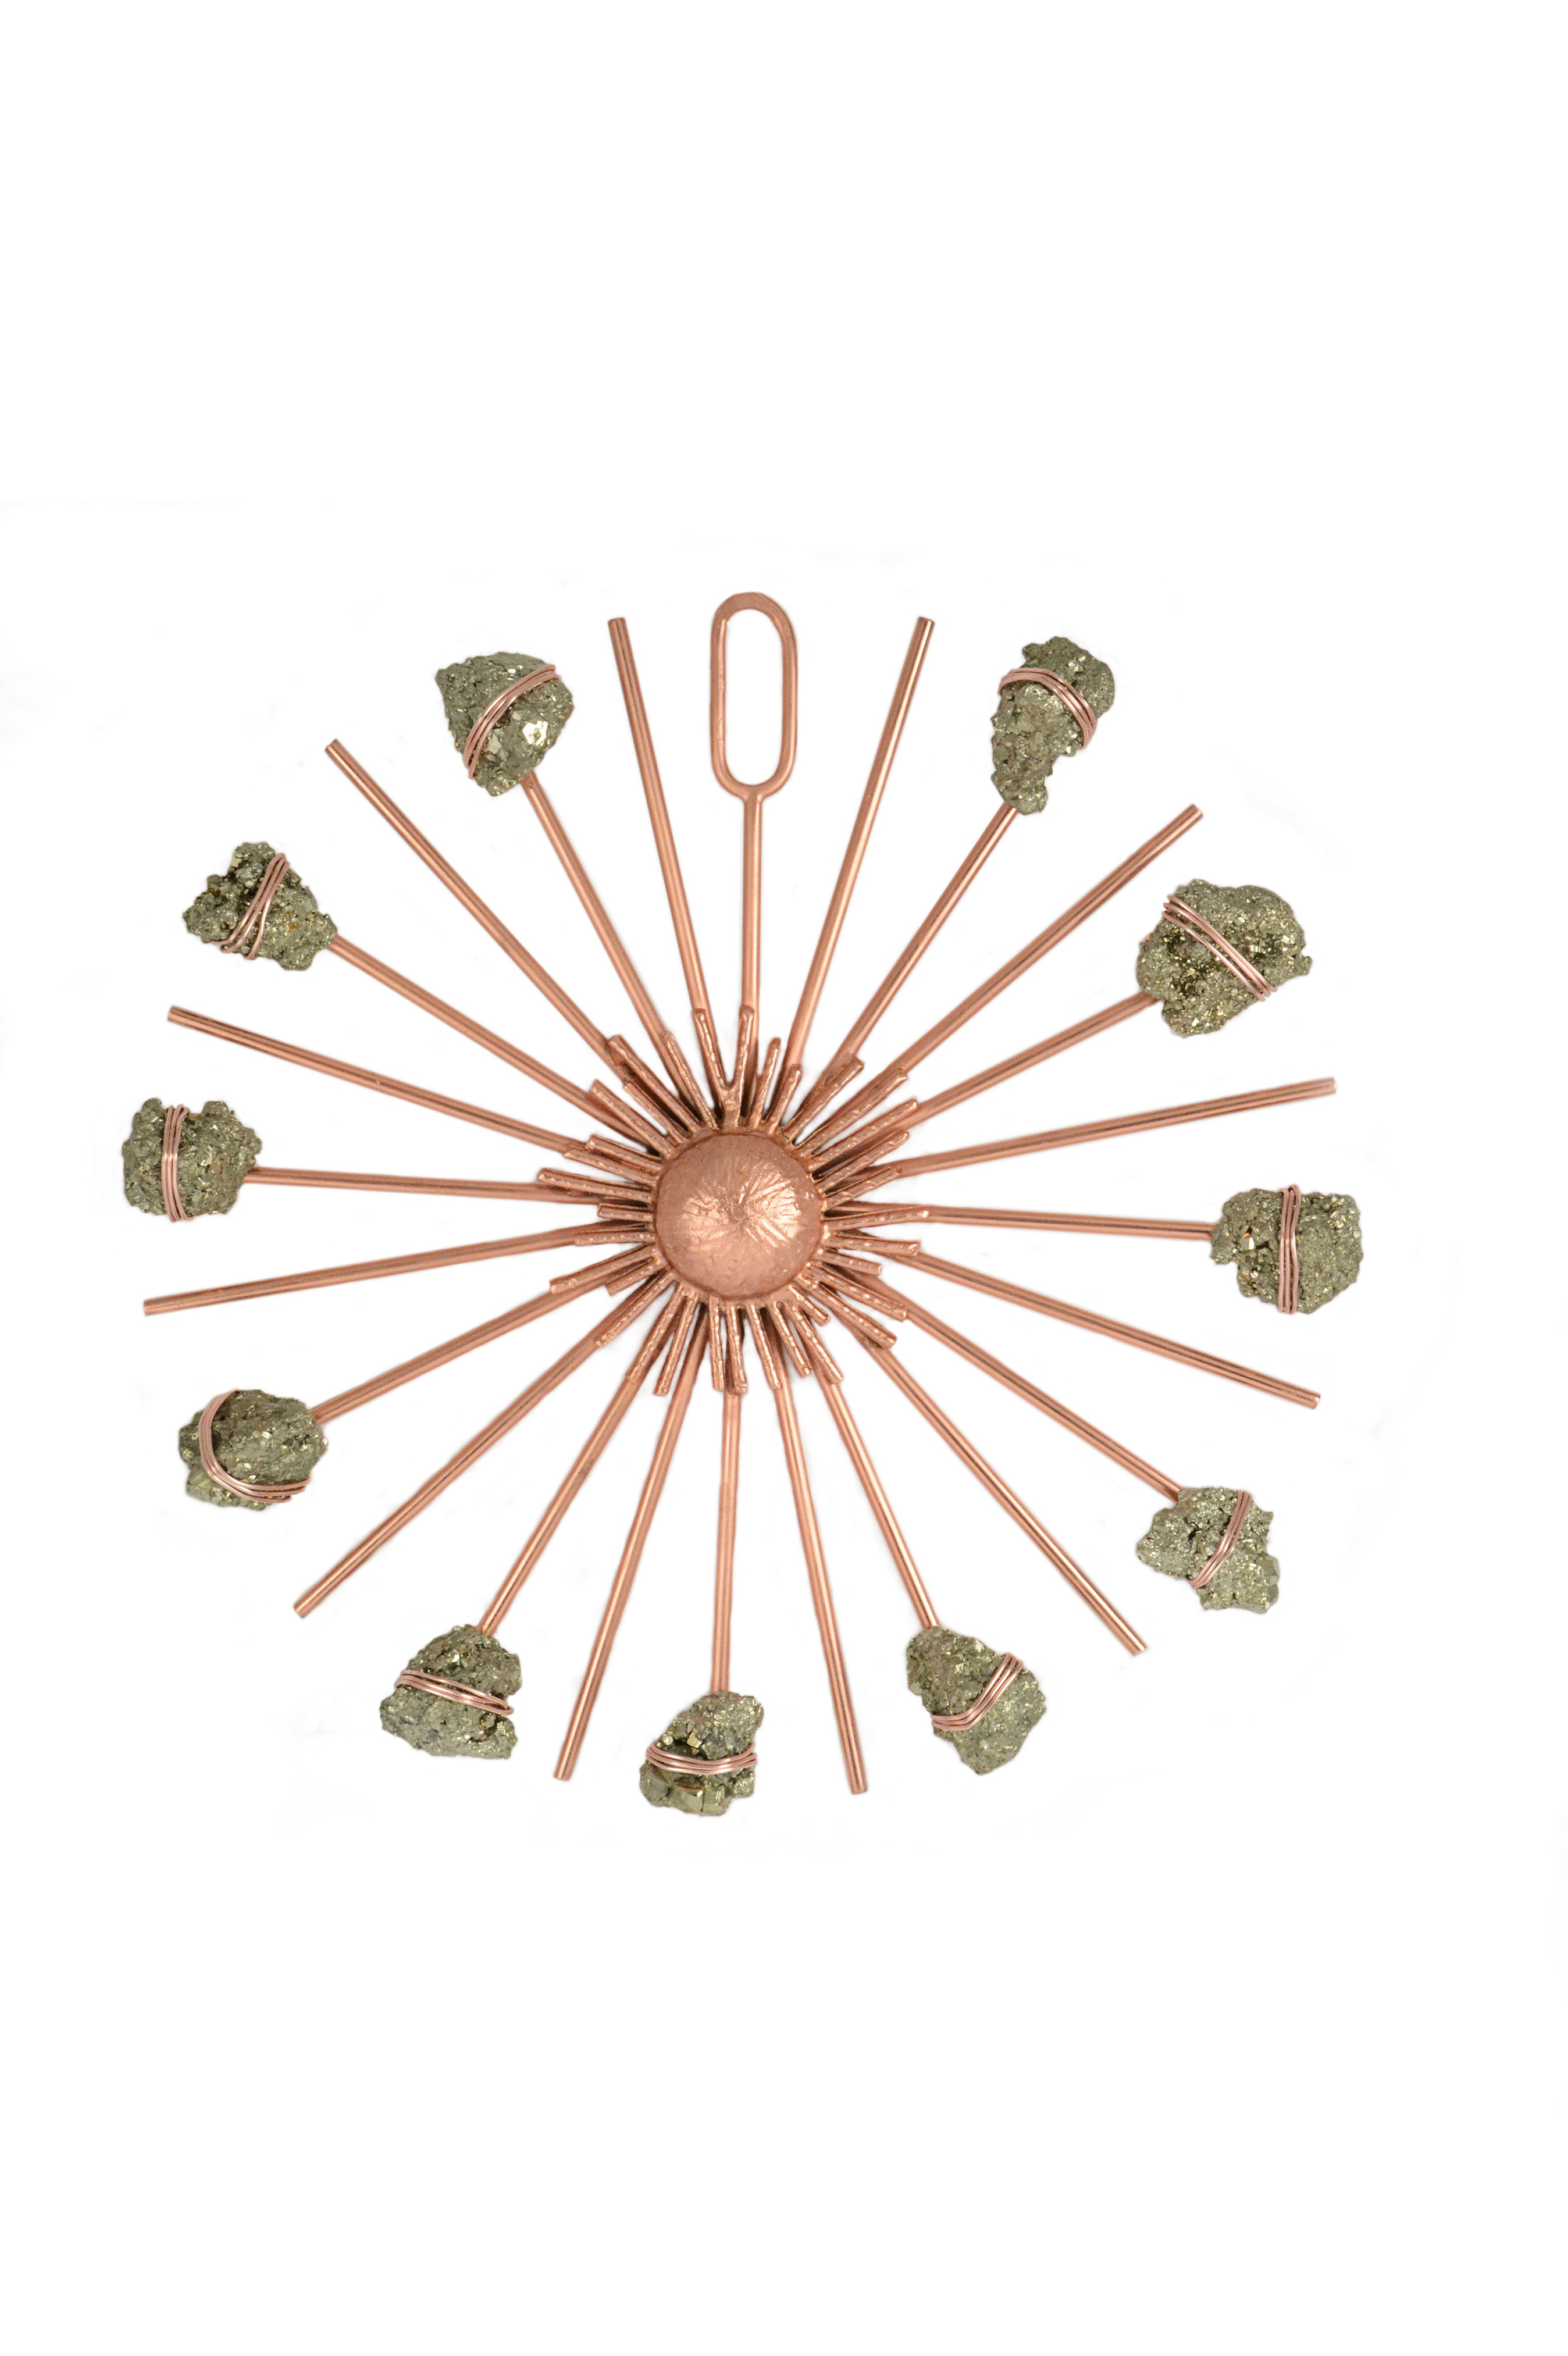 Ariana Ost's Sunburst Crystal Grid Rose Gold Pyrite - manifest abundance & protection (handmade, pyrite, rose gold). Elevate your space & attract prosperity. Shop now!